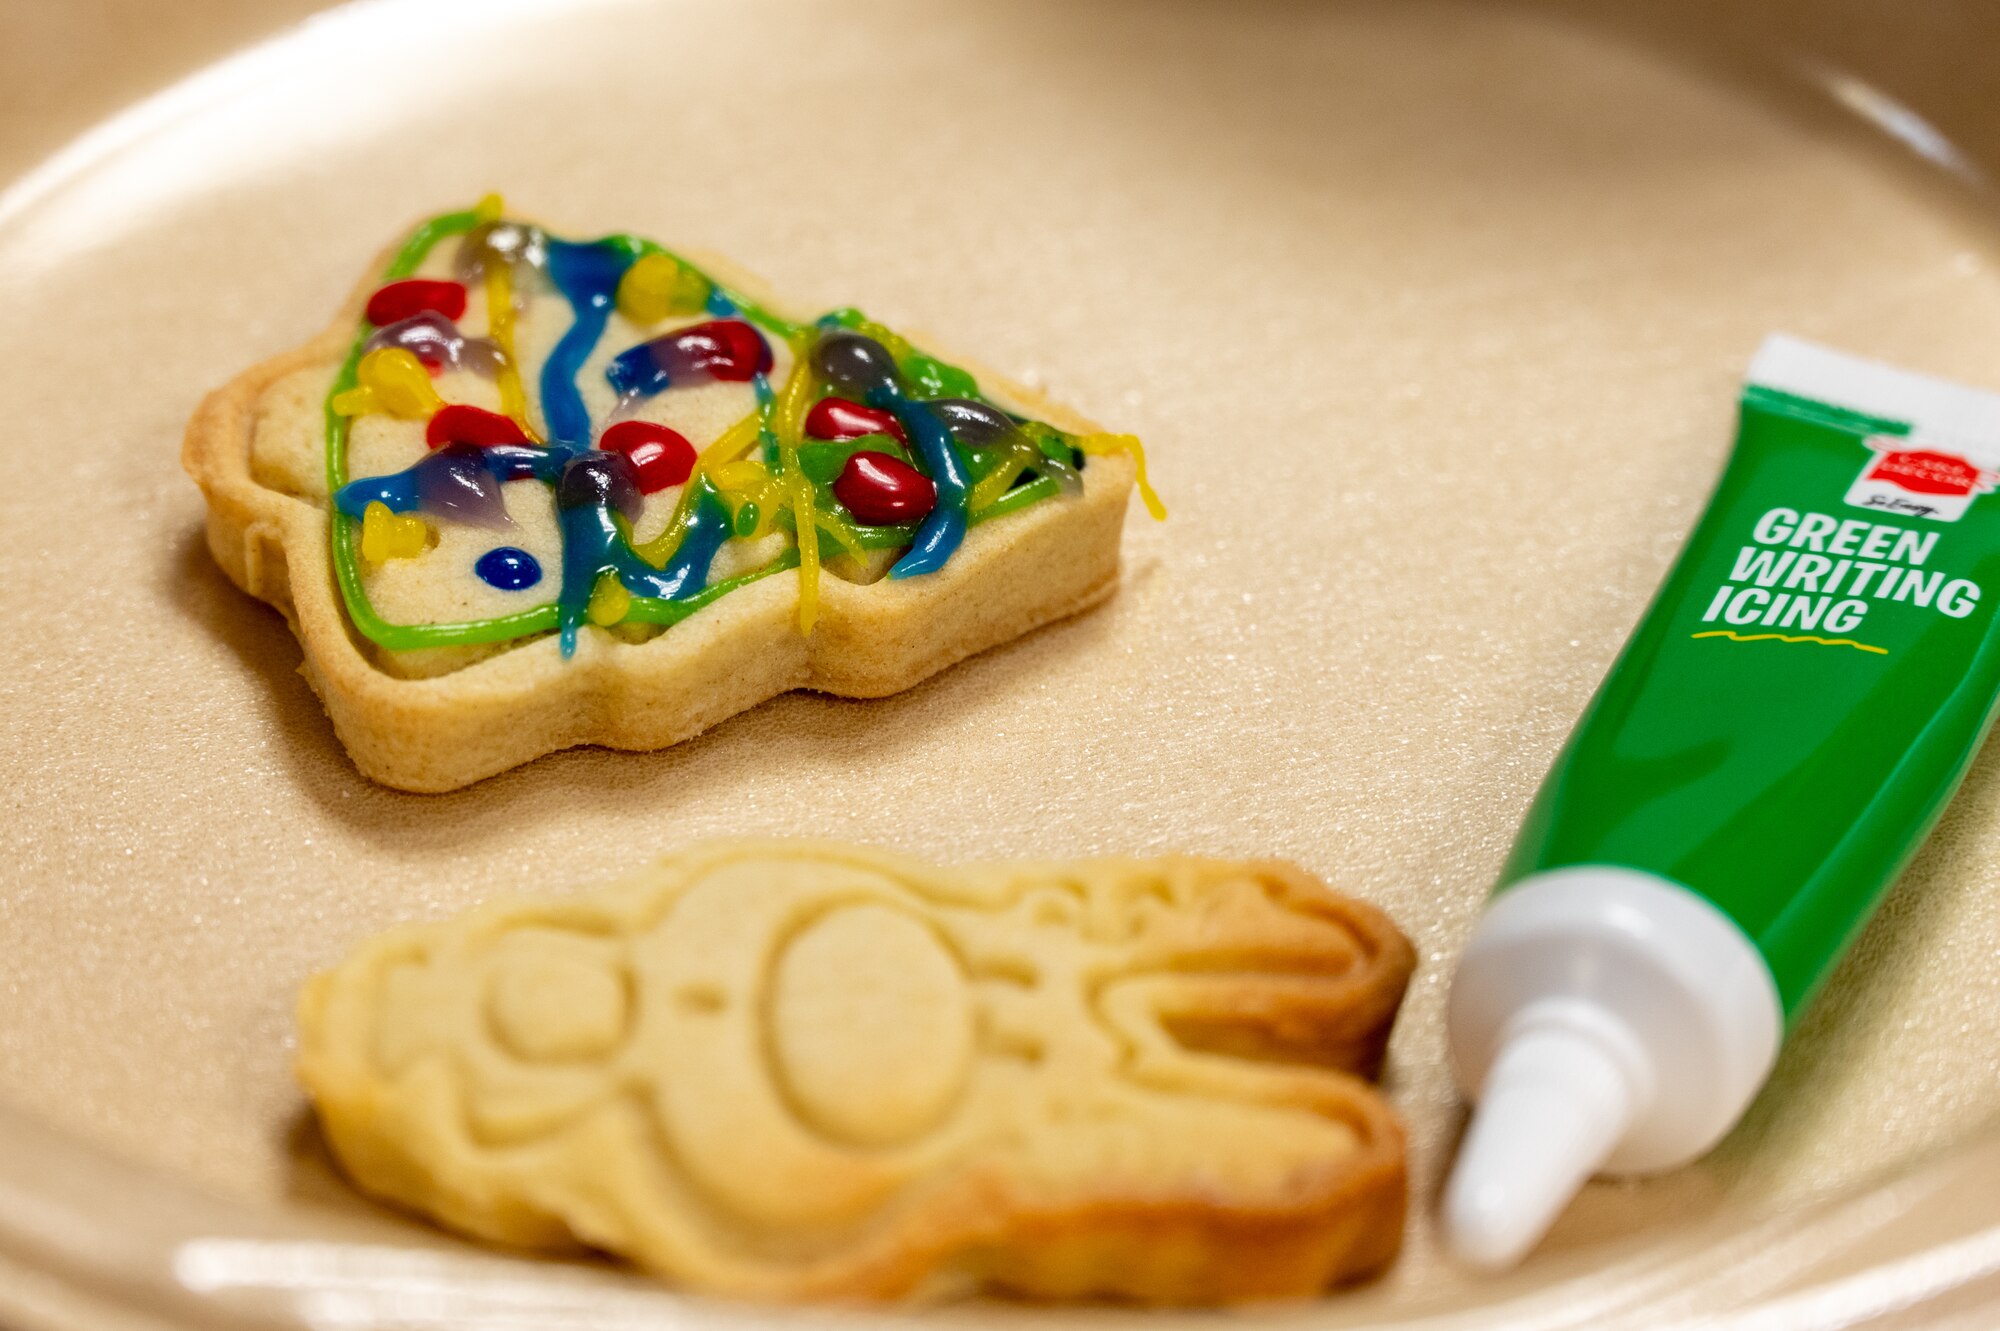 A freshly decorated cookie sits on a plate.